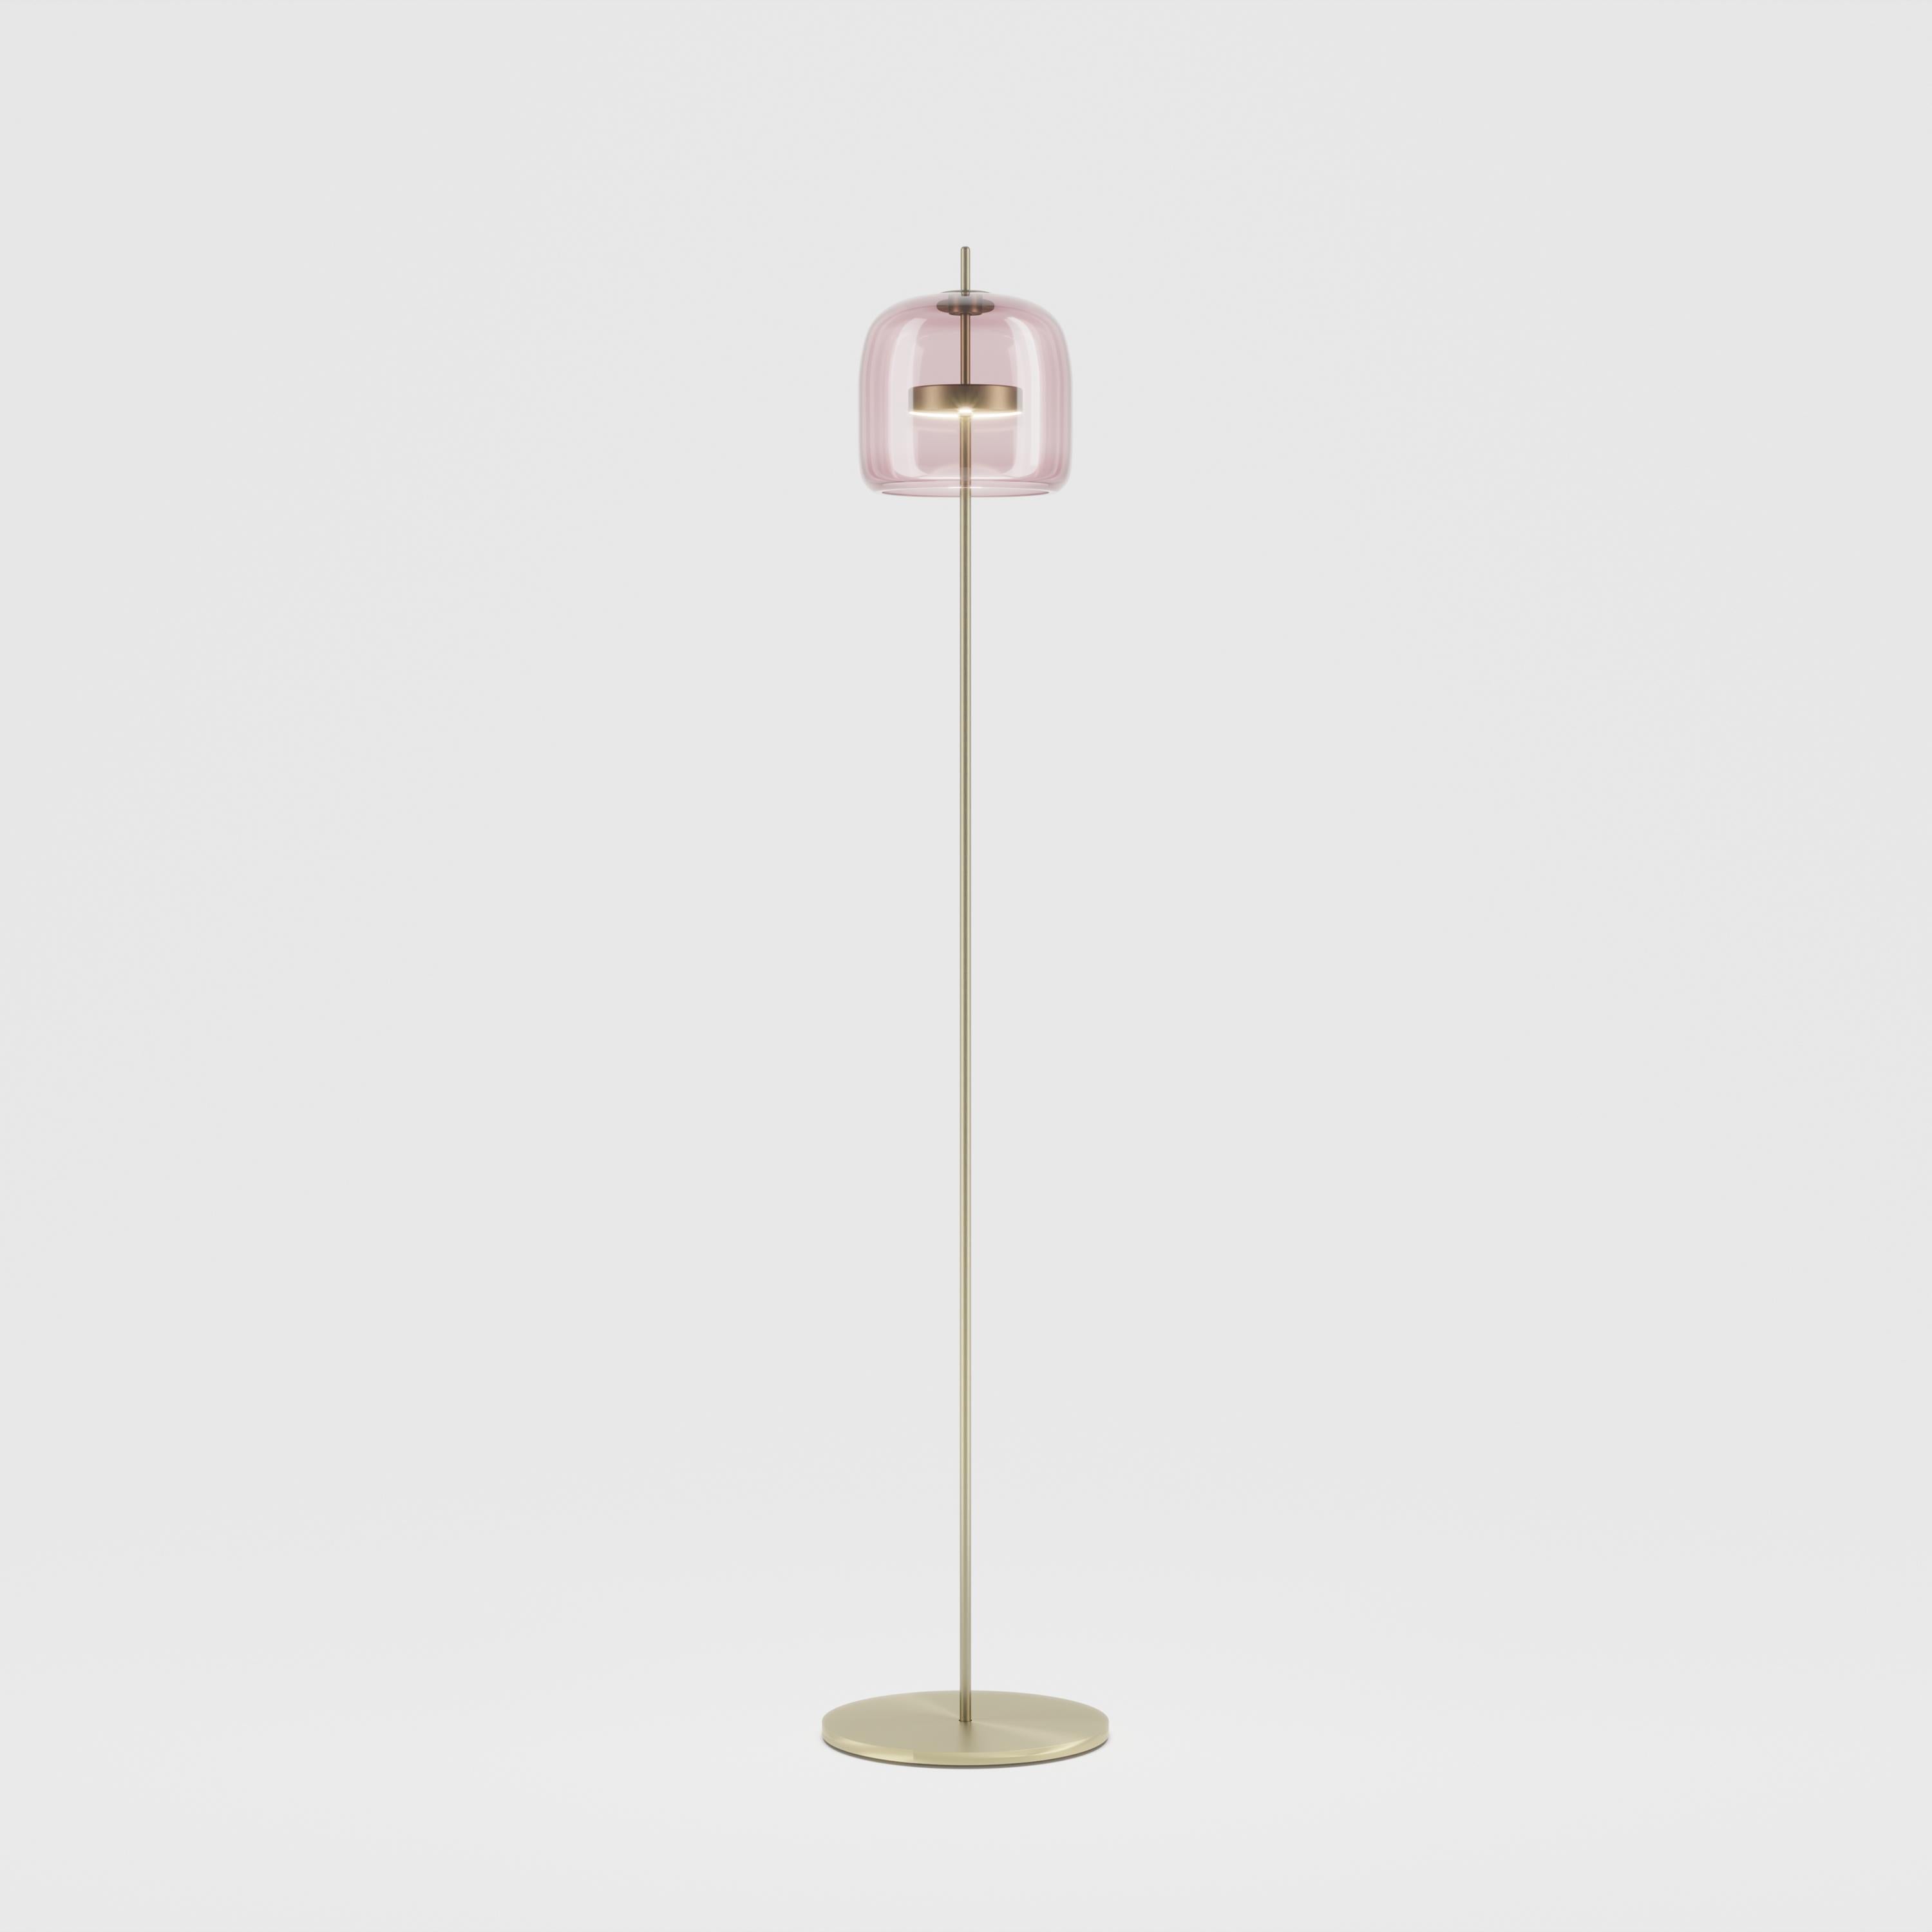 The elegant and delicate look of the blown glass finds a new dimension in Jube. Two glass units placed side by side, so perfectly assembled, that they look like a unique piece. A sinuous lamp, with tone-on-tone colours that give it a precious,